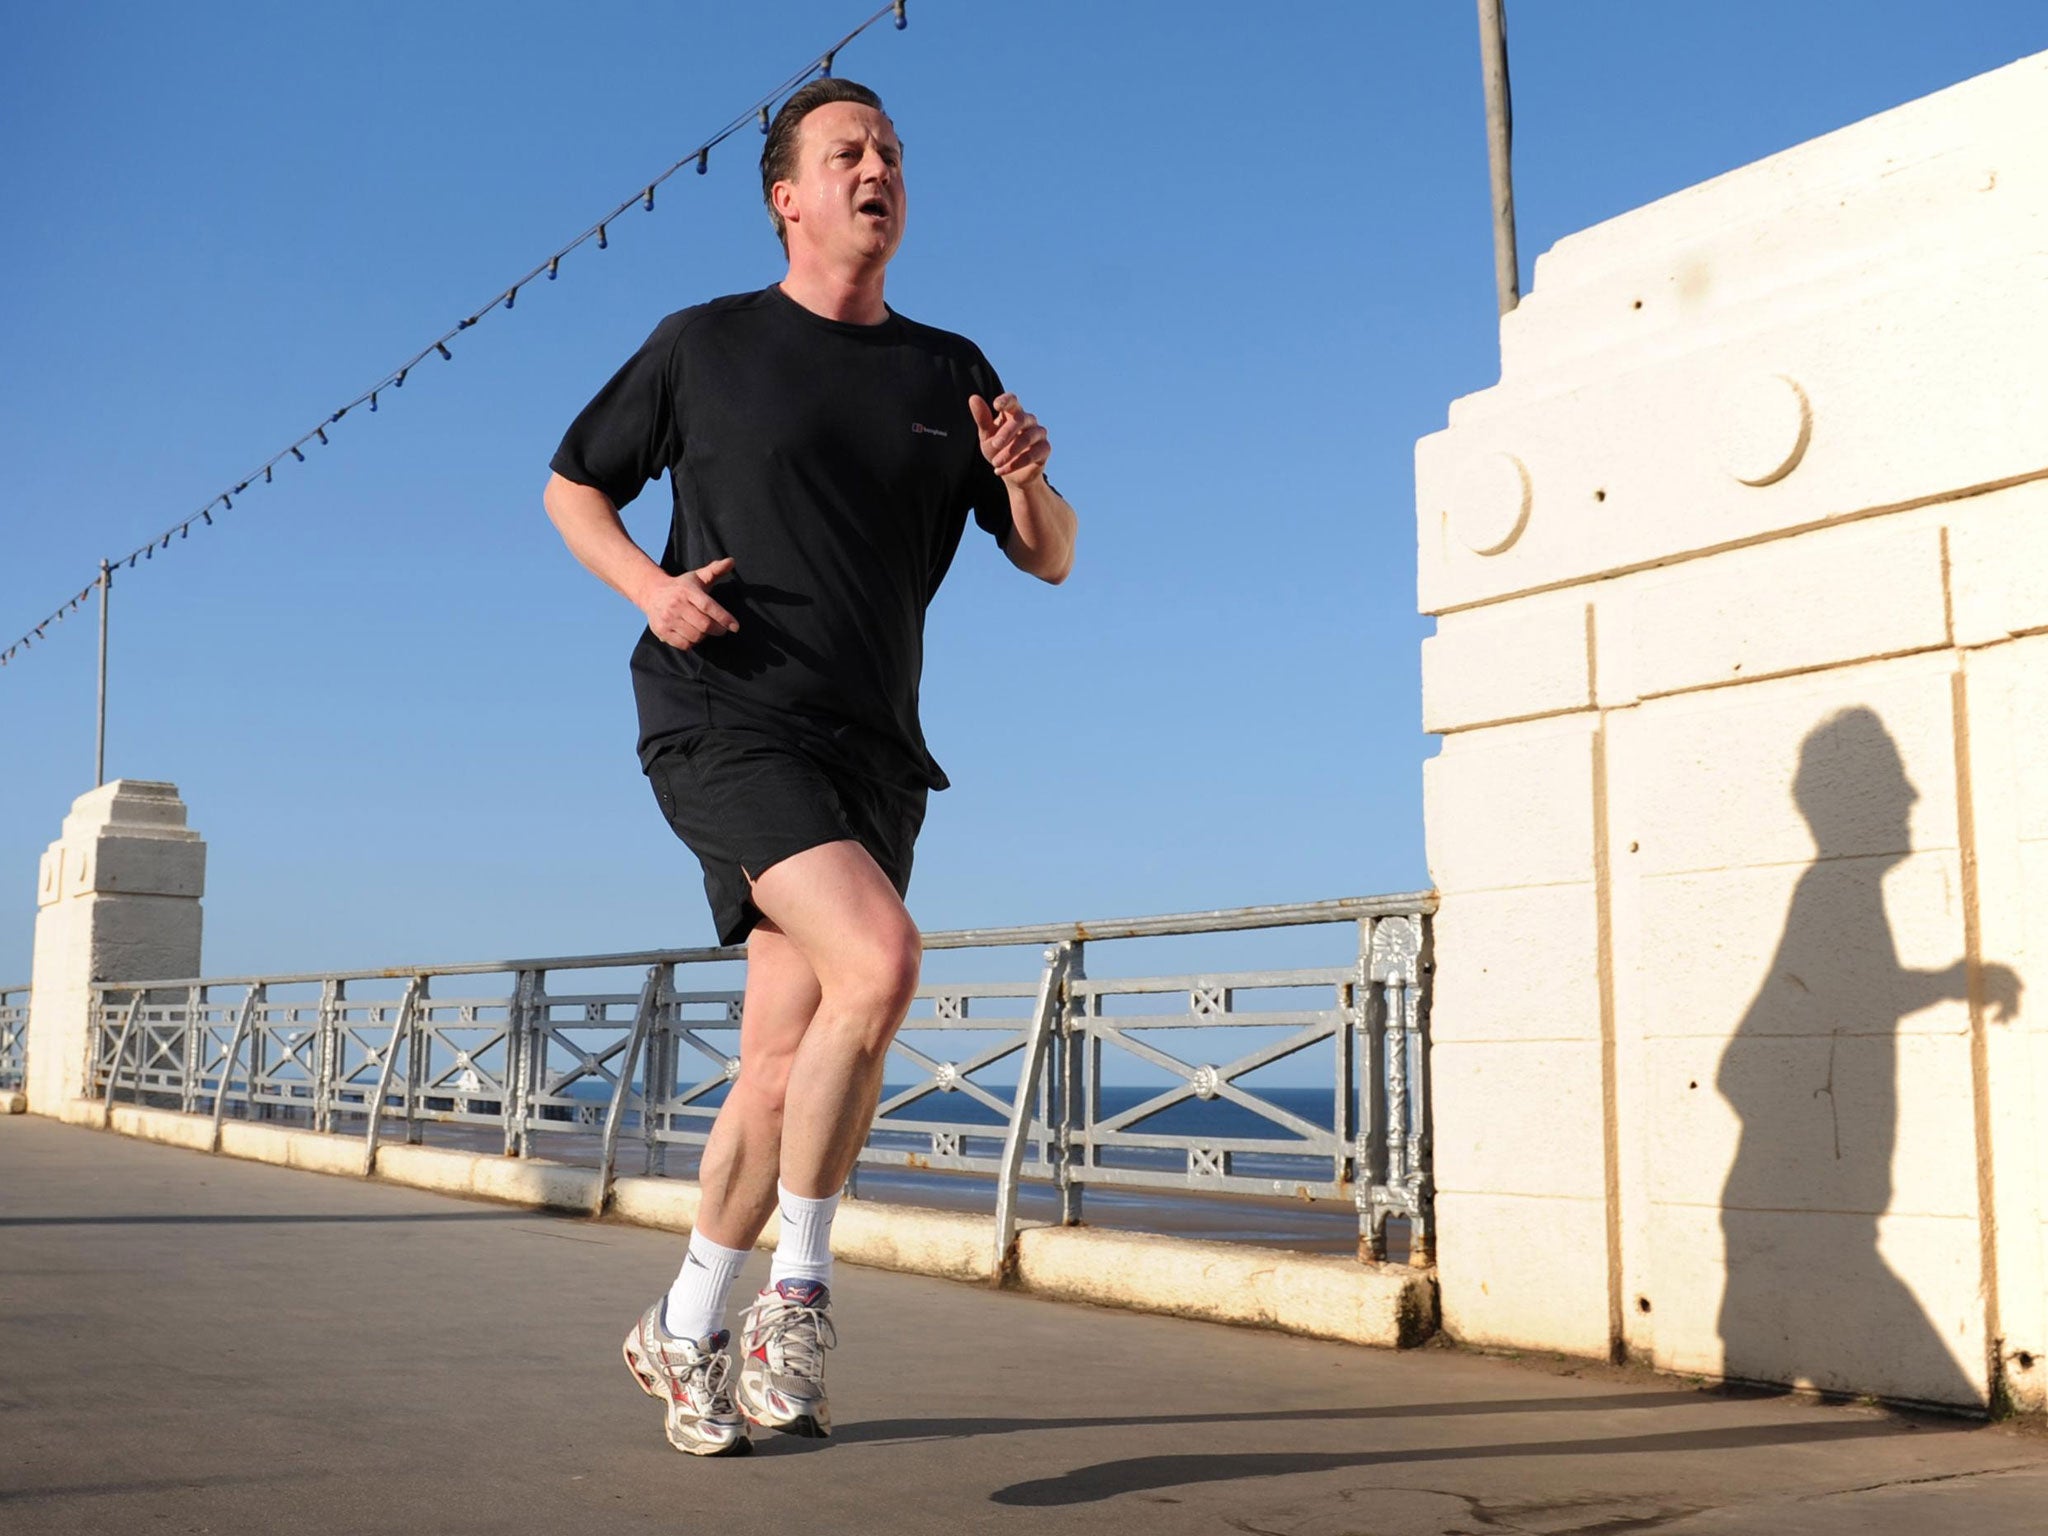 Is Eastleigh ready for the fastest politician in the West?: David Cameron runs along the seafront in Blackpool. He will be hot-footing it to Eastleigh next week, on a Benny Hill-themed pilgrimage, presumably.